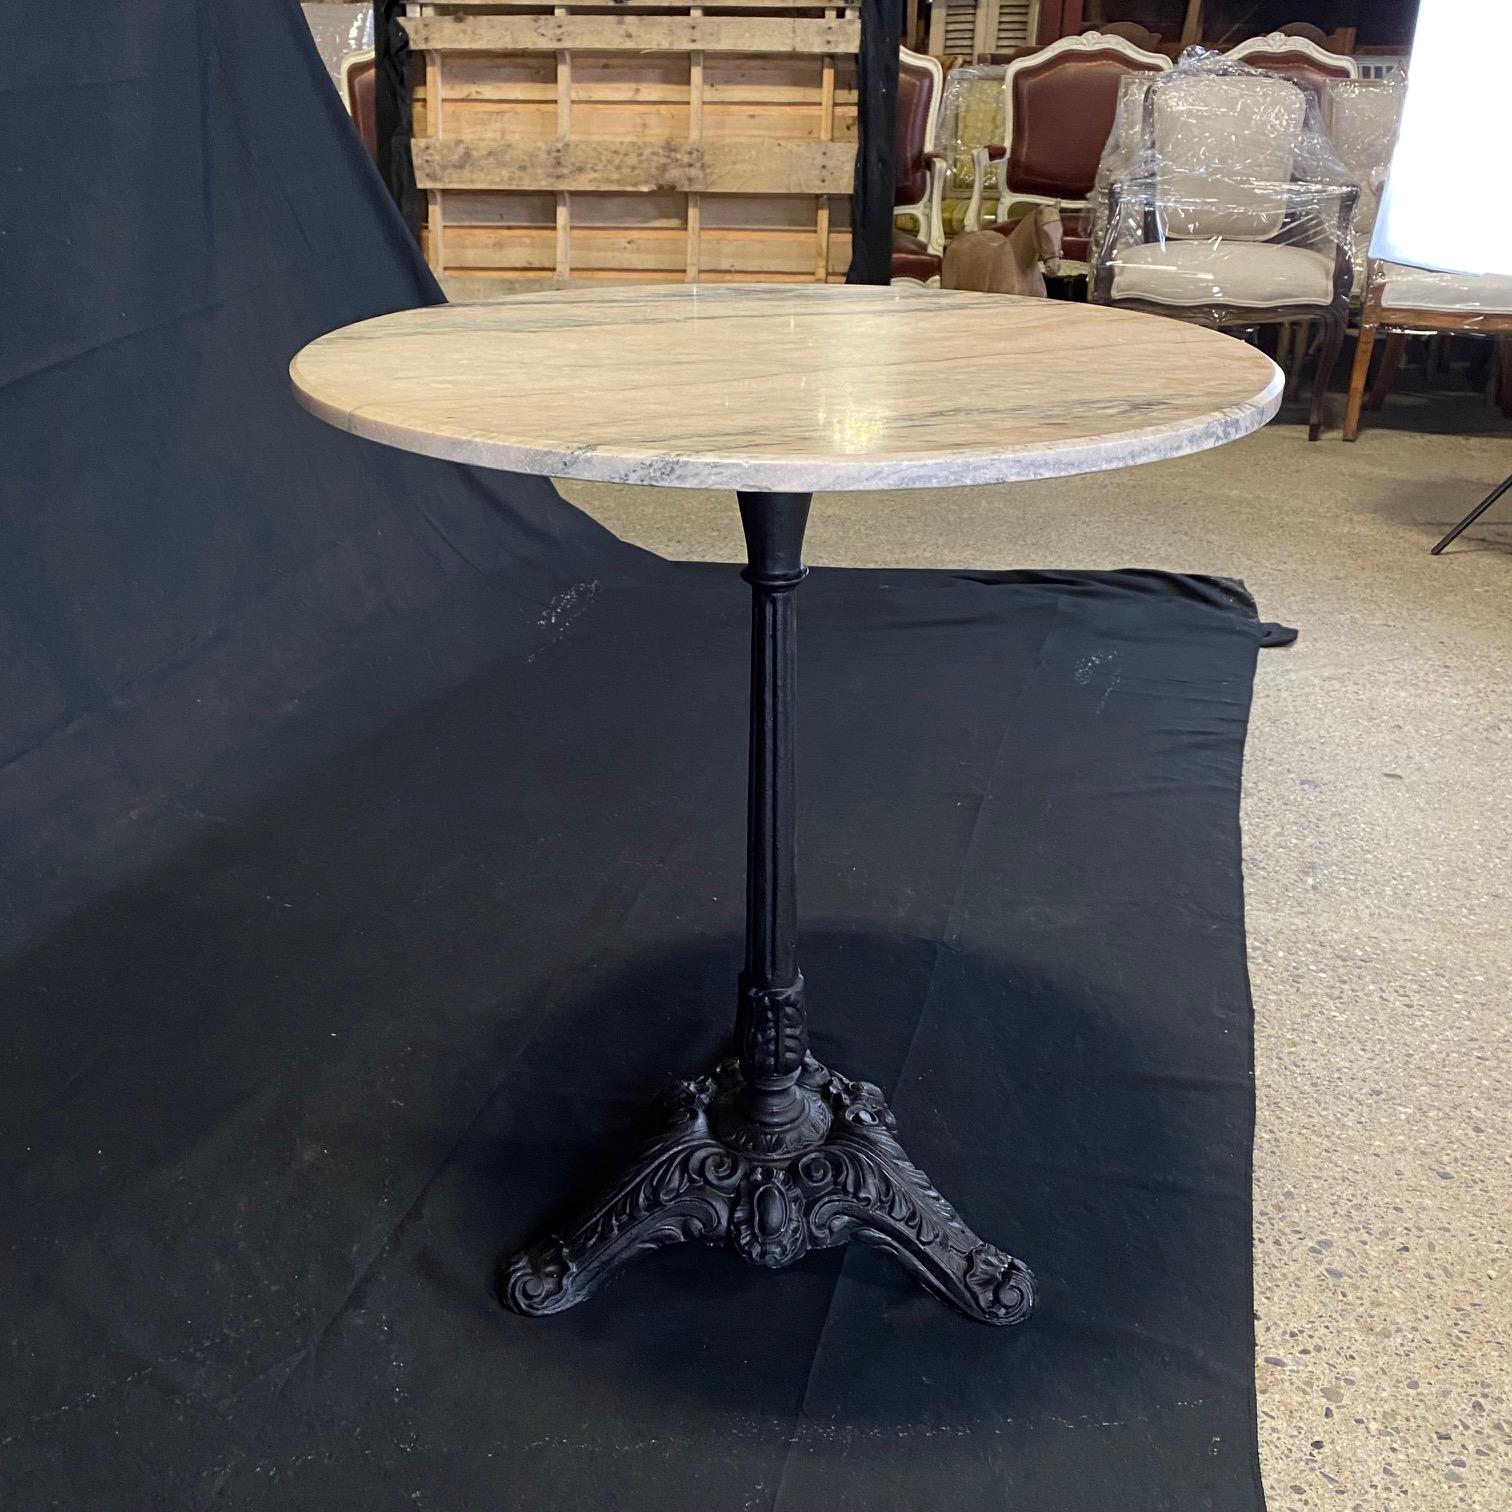 French Provincial Charming Early 20th Century French Marble Top Bistro or Cafe Table